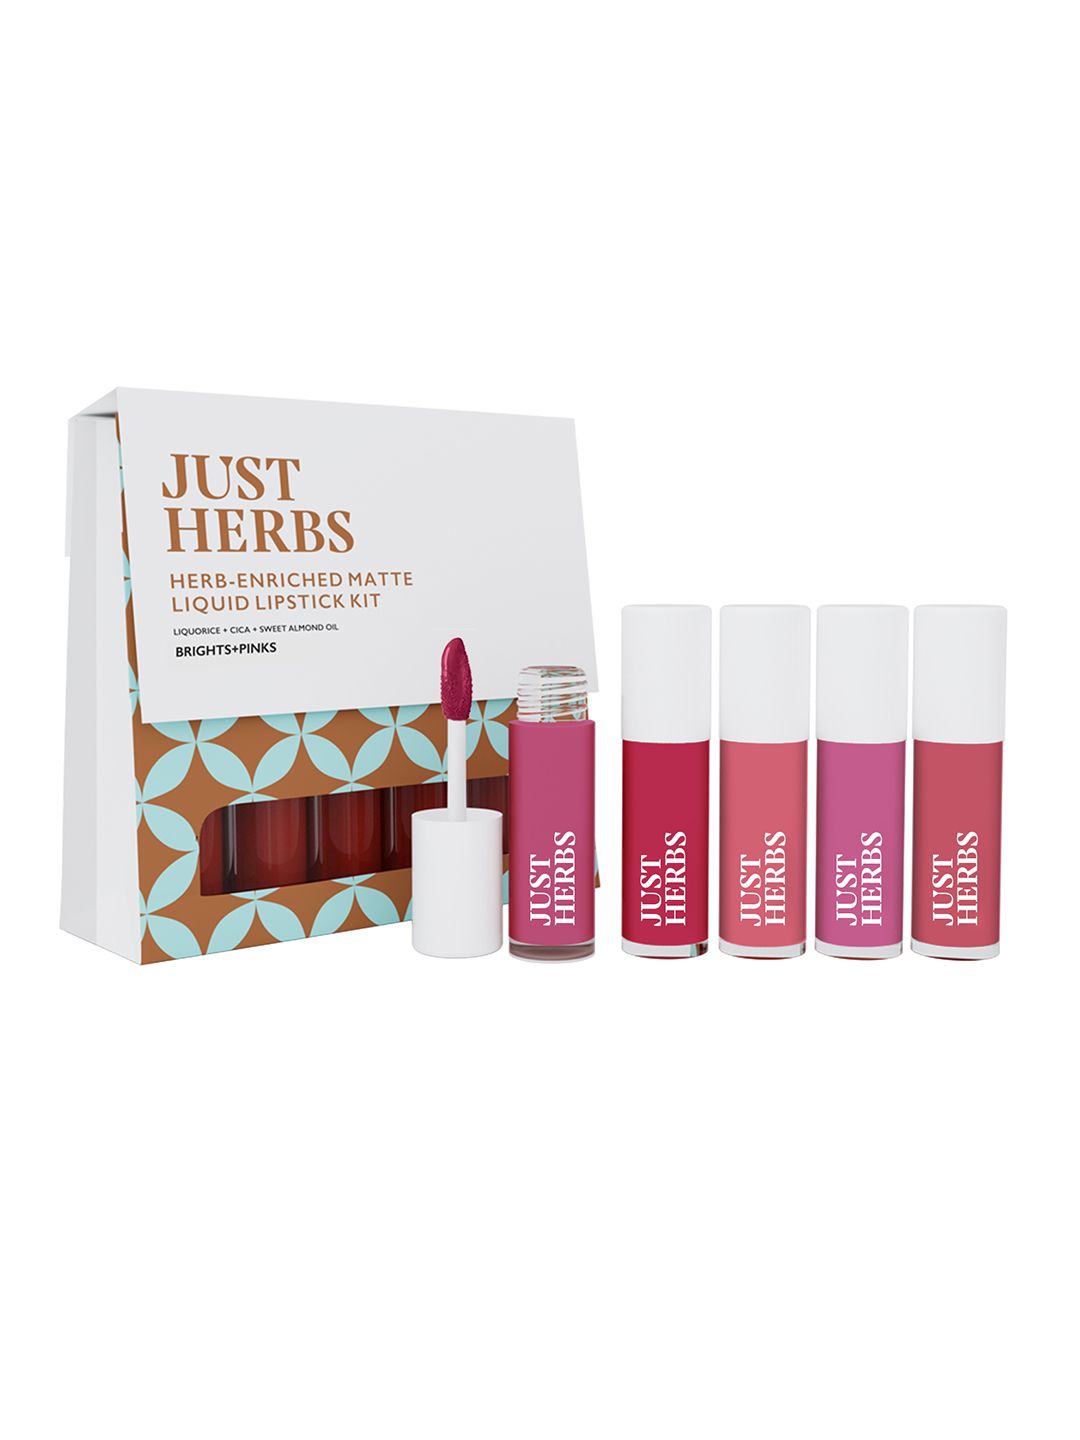 Just Herbs Mini Herb-Enriched Matte Liquid Lipstick Kit - Set of 5 - Brights & Pinks Price in India